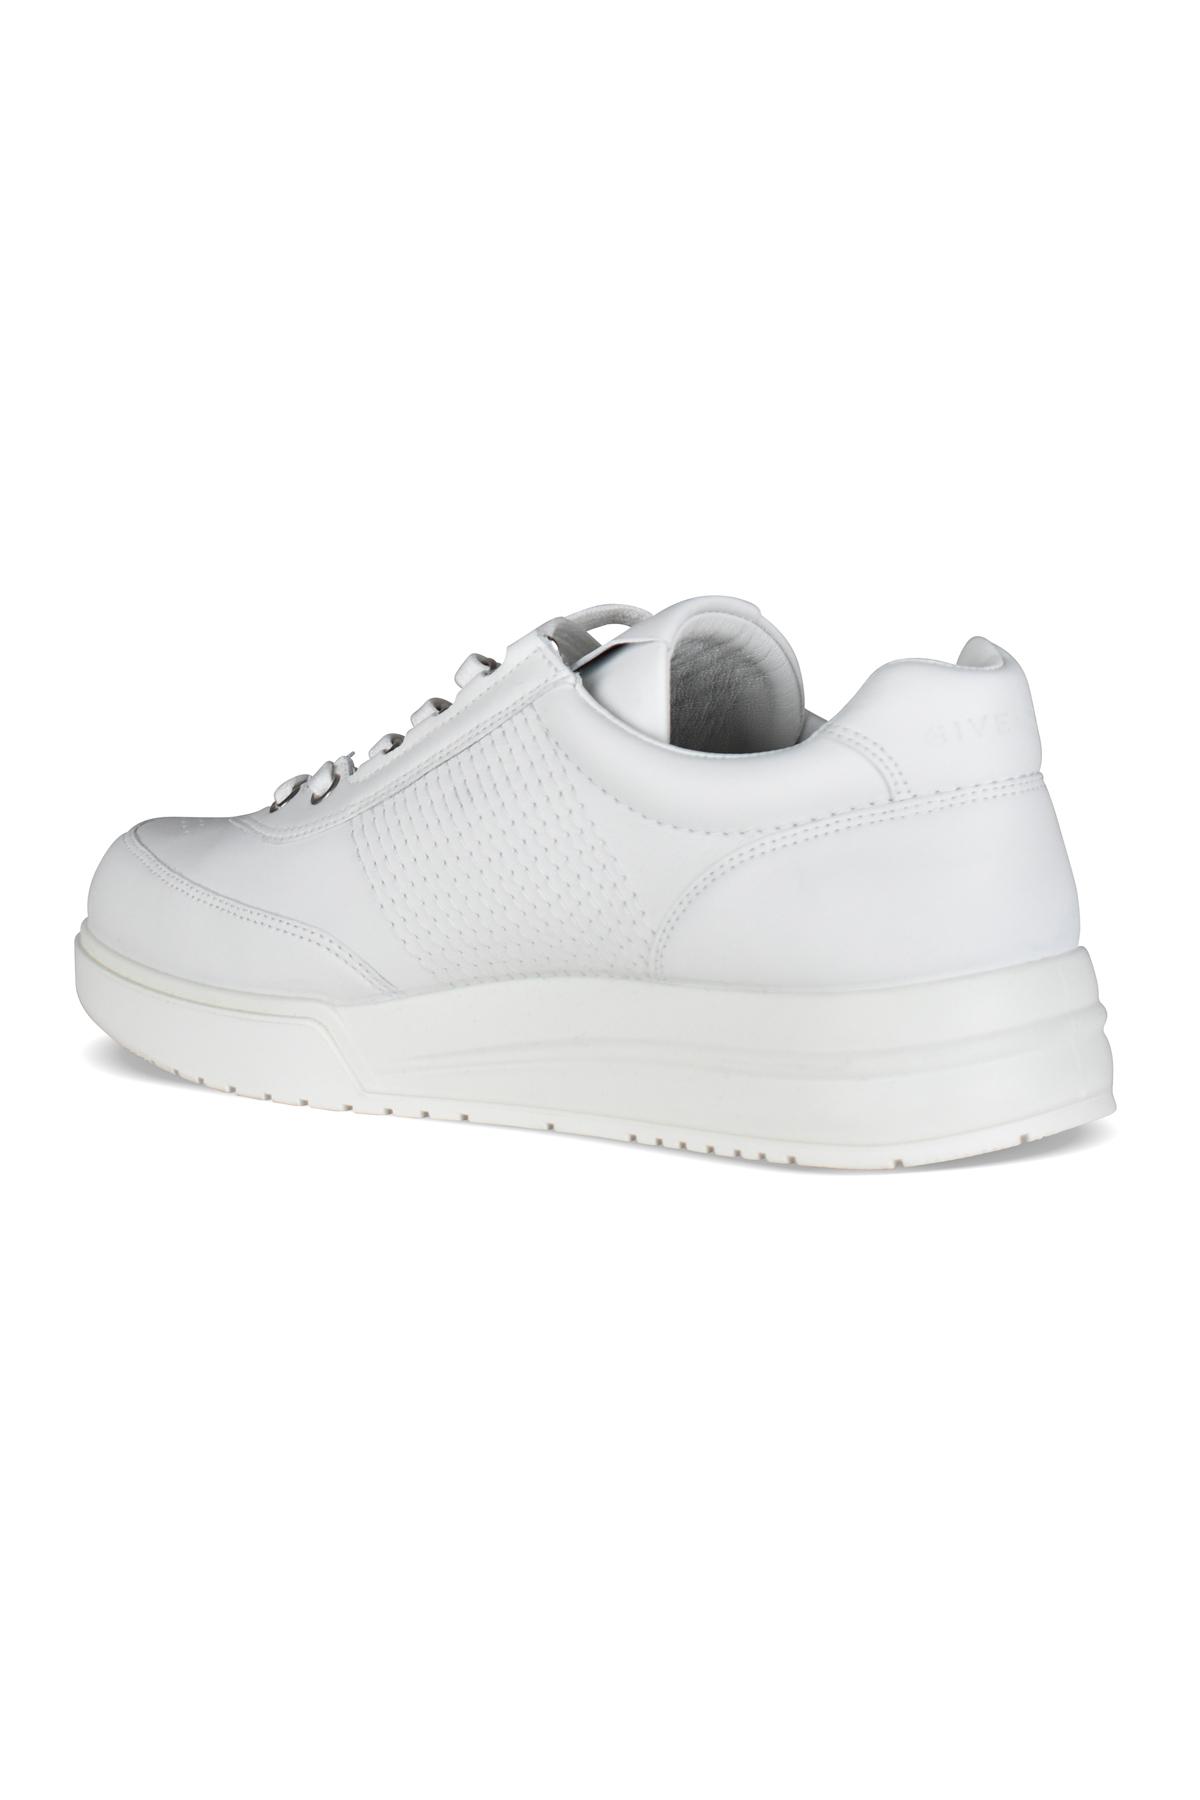 Givenchy Sneakers G4 in Gray for Men | Lyst